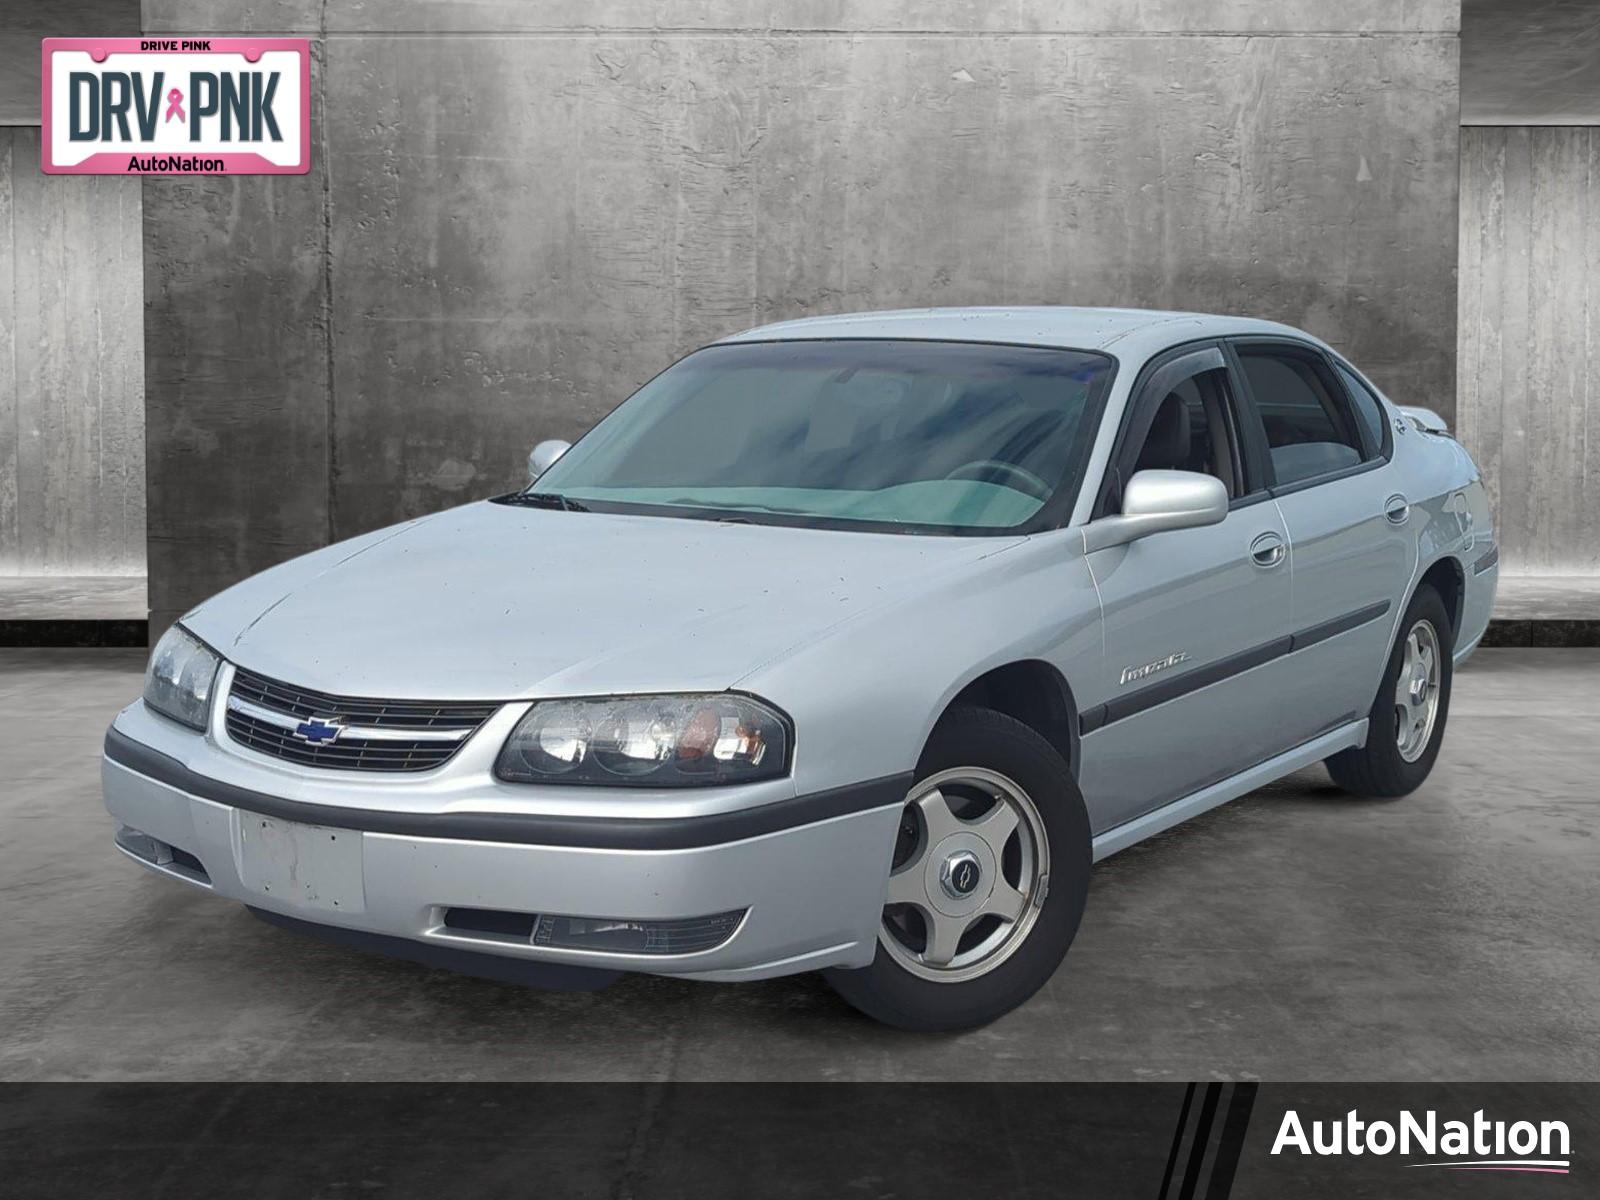 2002 Chevrolet Impala Vehicle Photo in Clearwater, FL 33765